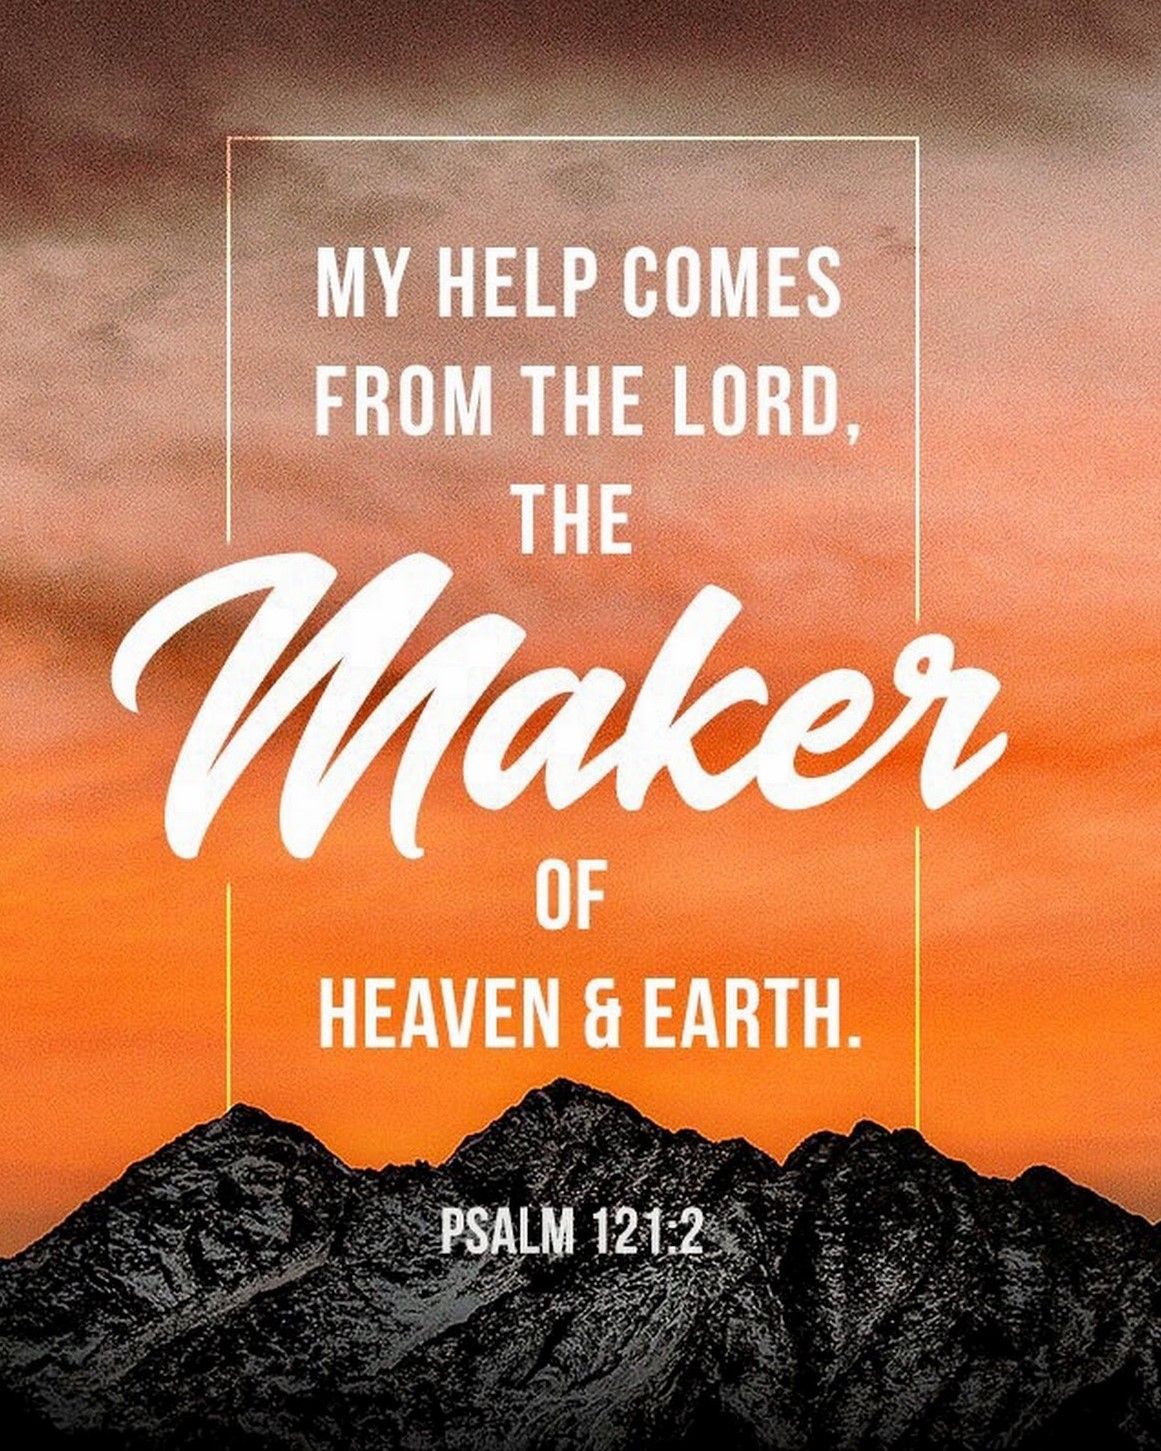 Psalm 121 Images Wallpapers